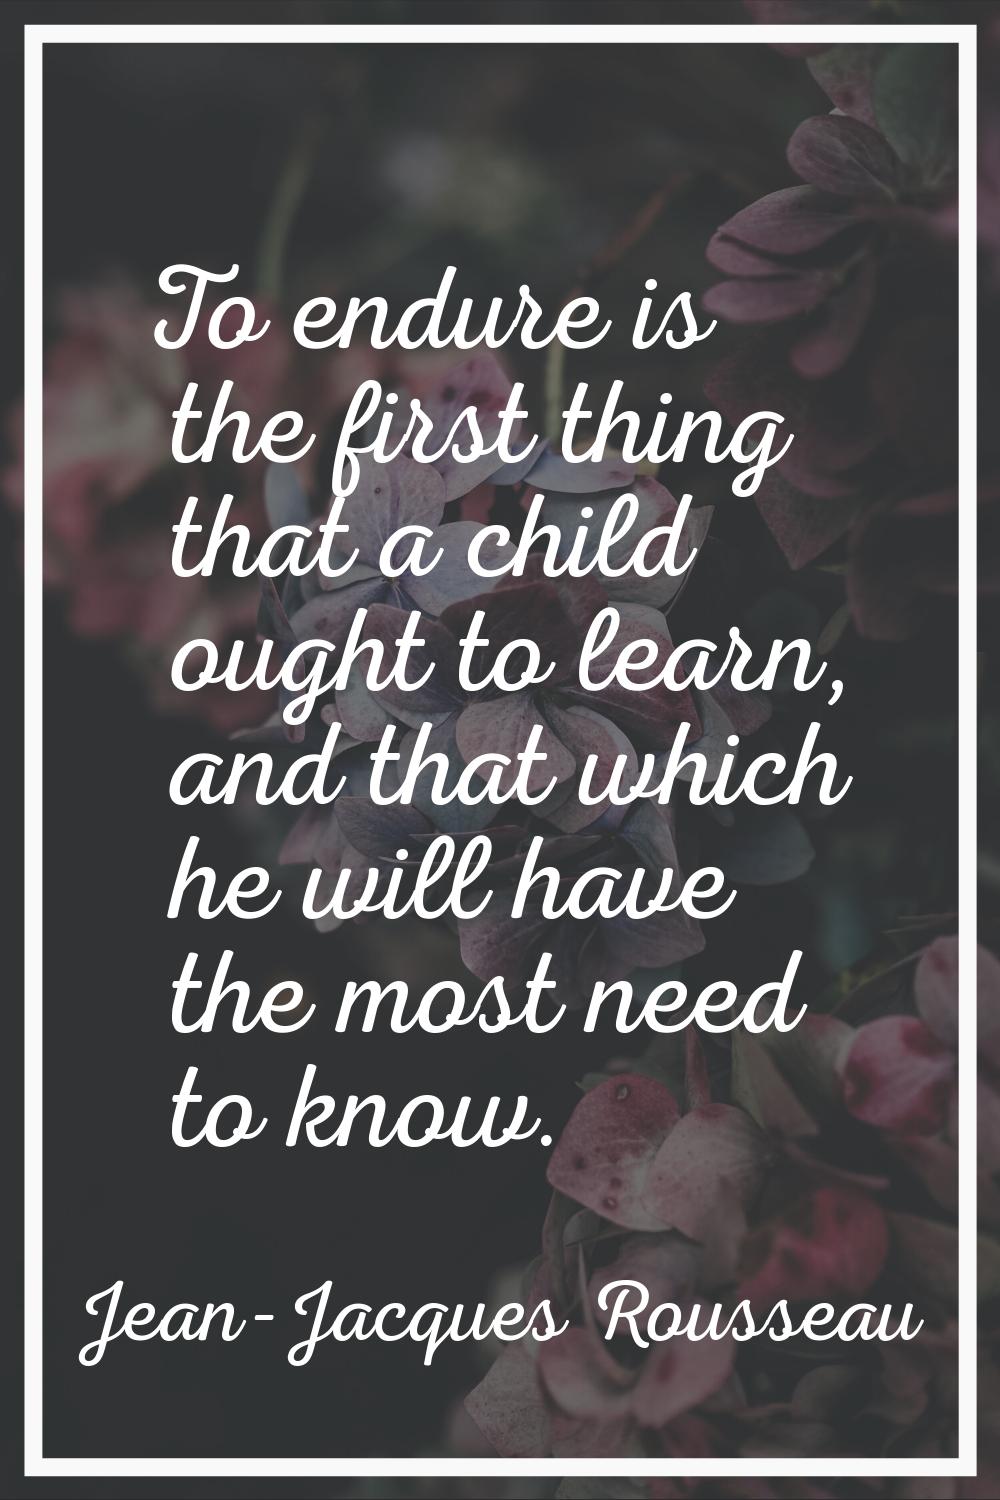 To endure is the first thing that a child ought to learn, and that which he will have the most need